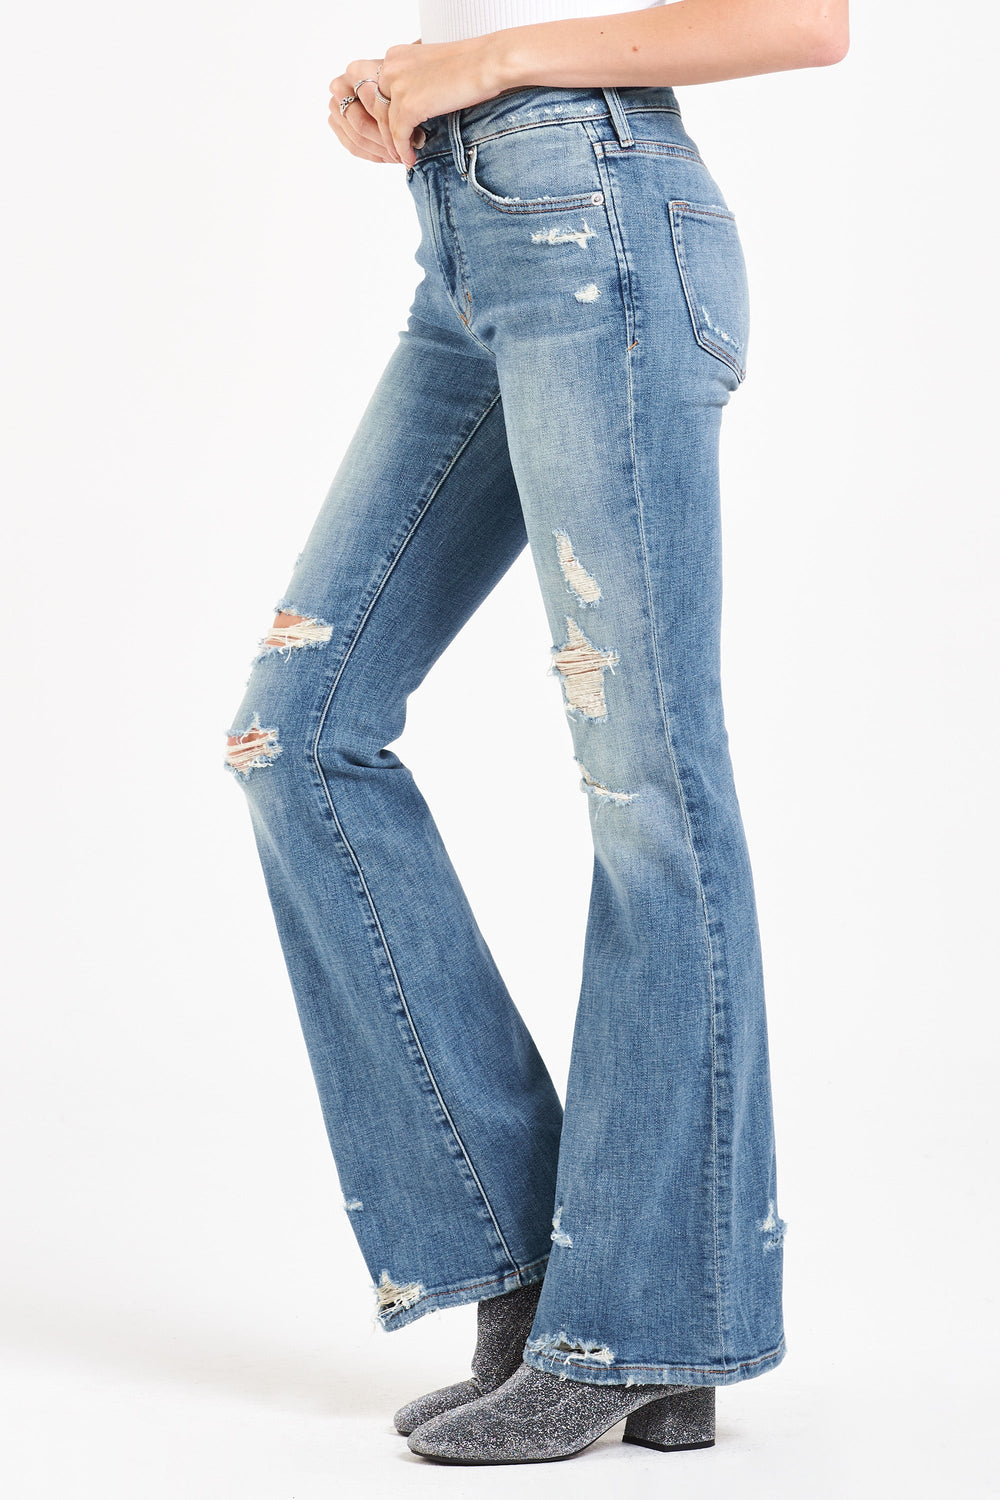 image of a female model wearing a ROSA HIGH RISE FLARE LEG JEANS ELM GROVE JEANS